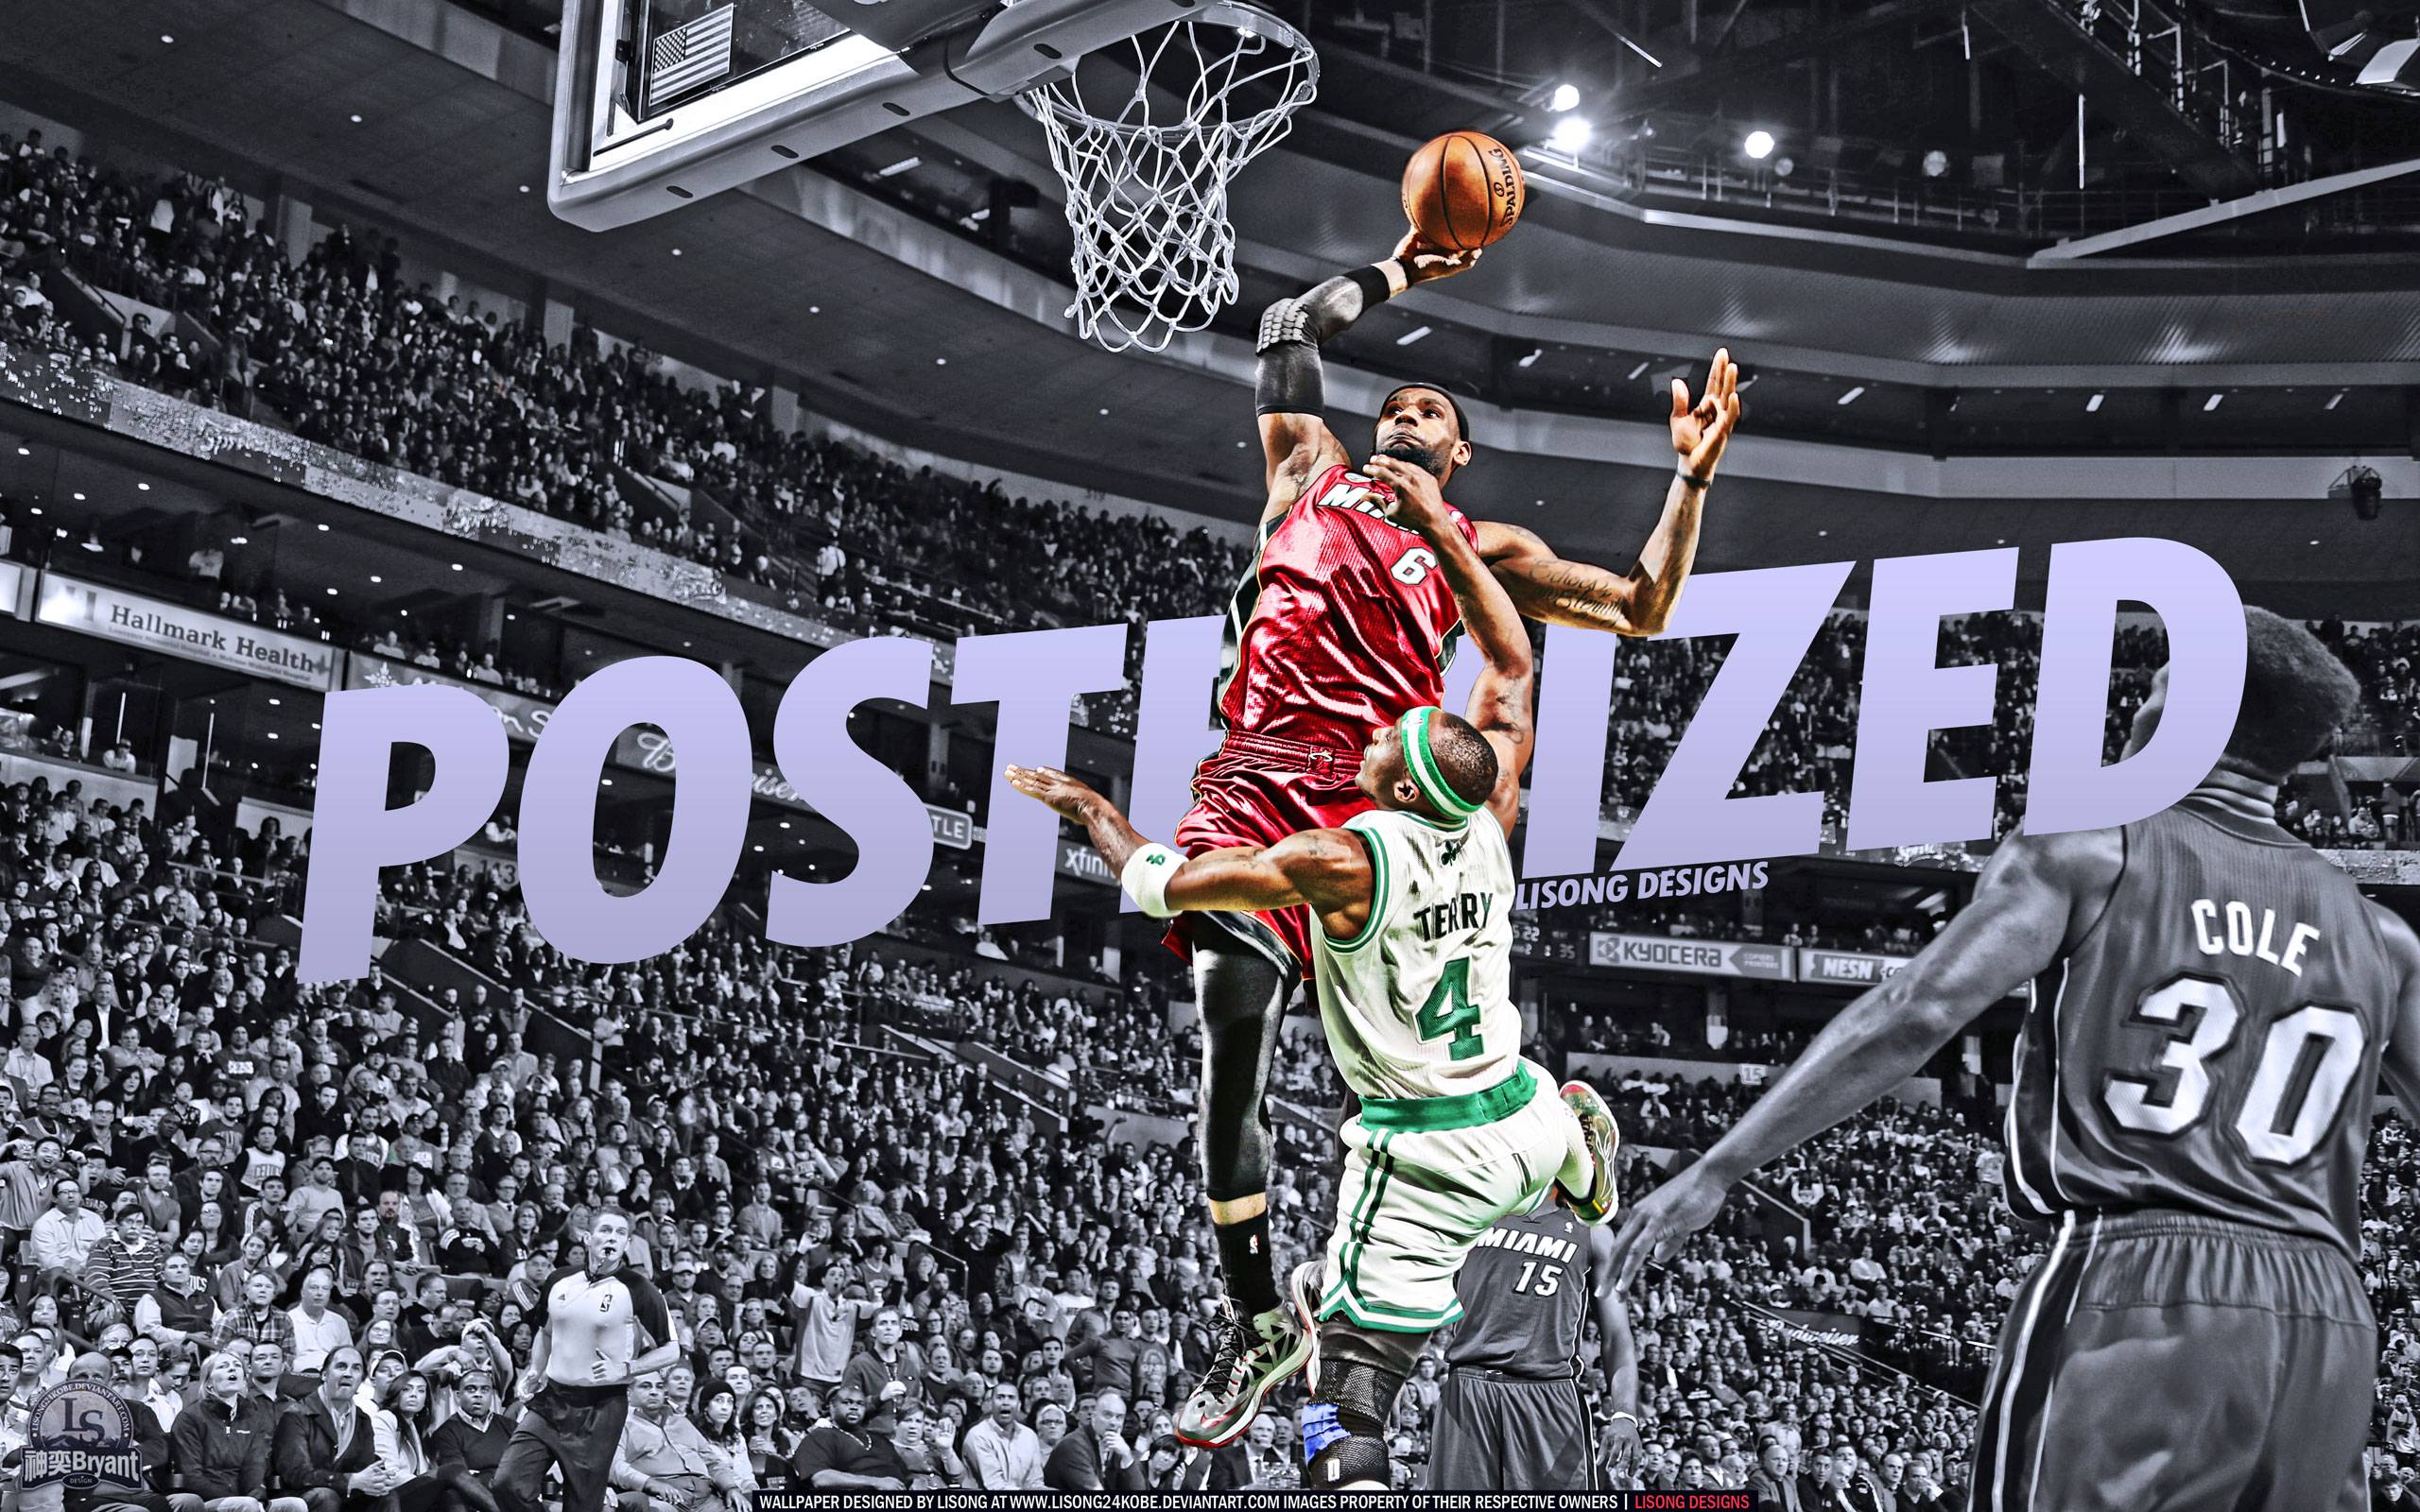 LeBron James Dunk wallpaper by zollitima - Download on ZEDGE™